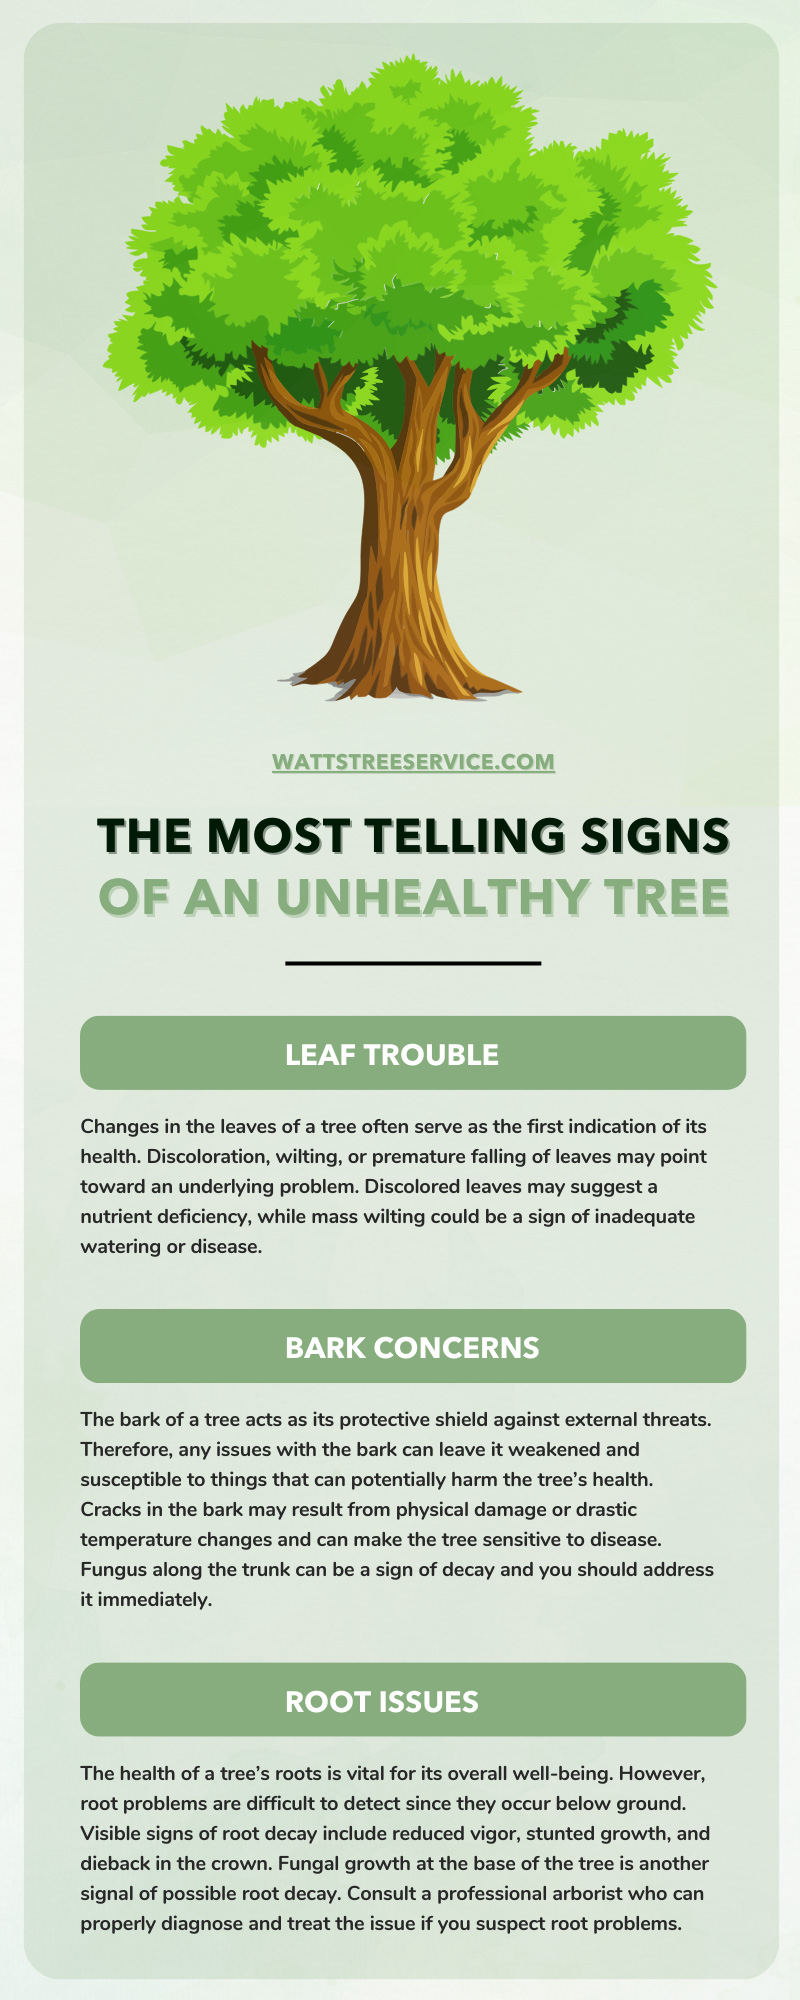 The Most Telling Signs of an Unhealthy Tree
